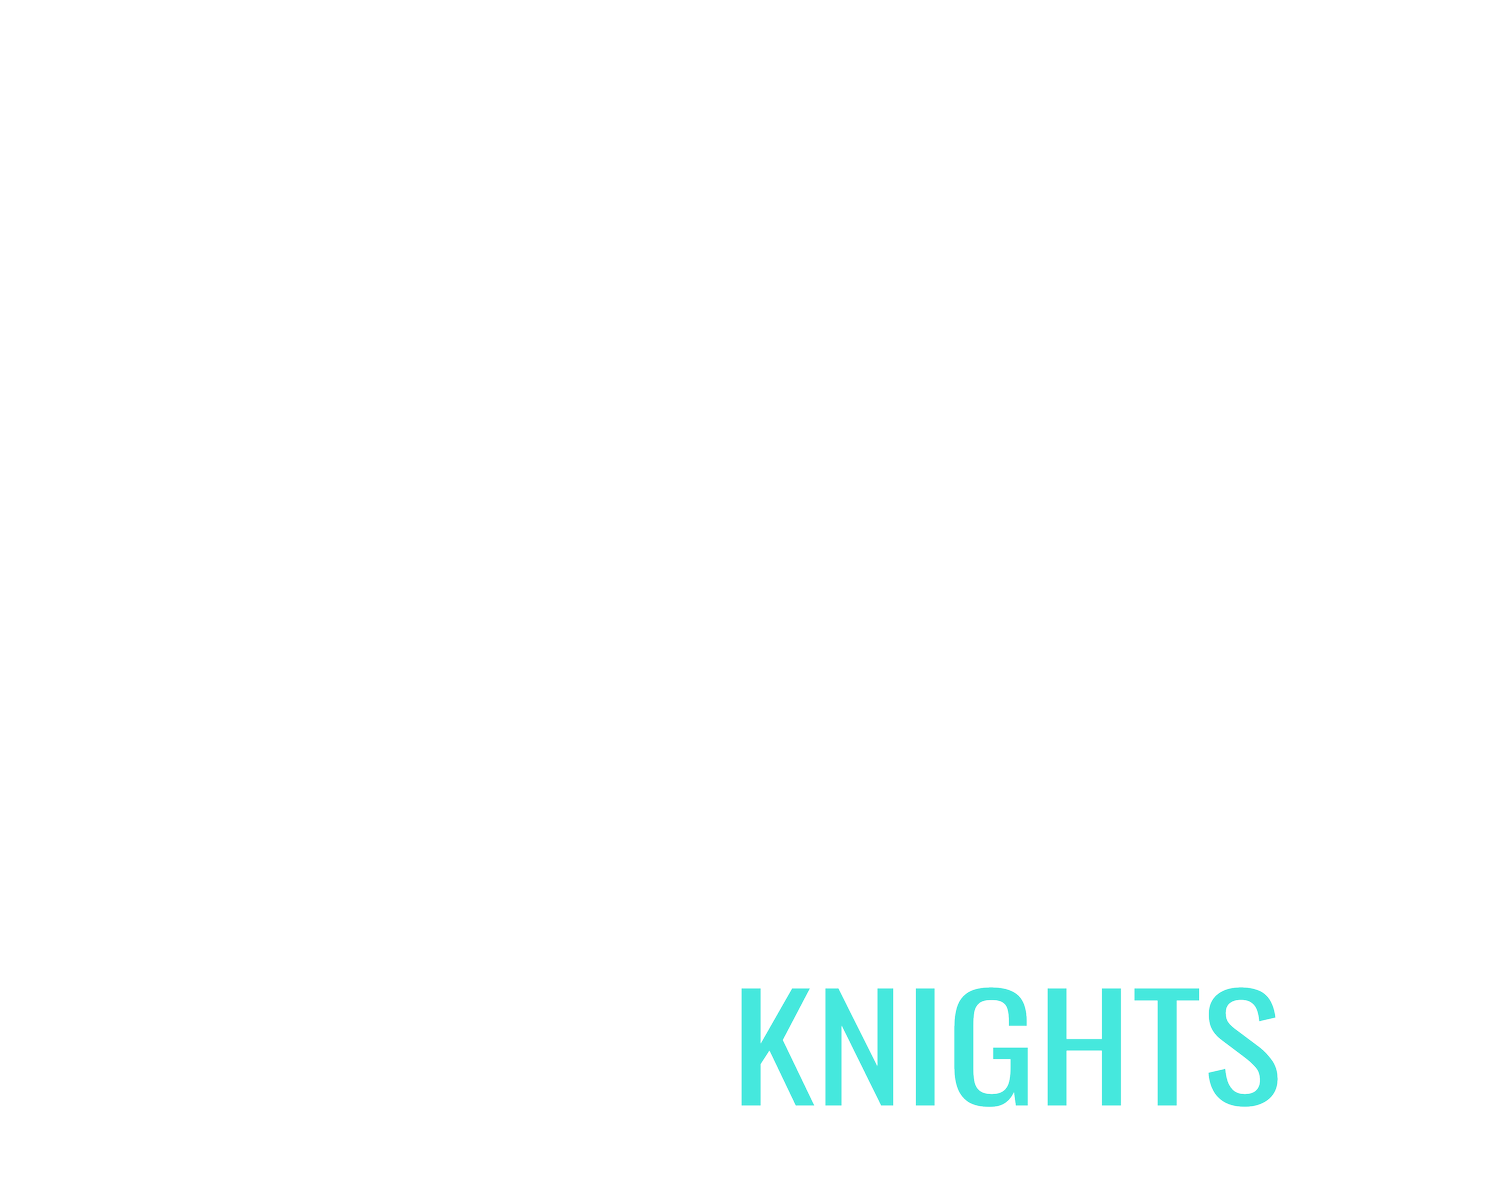 Cloudy Knights